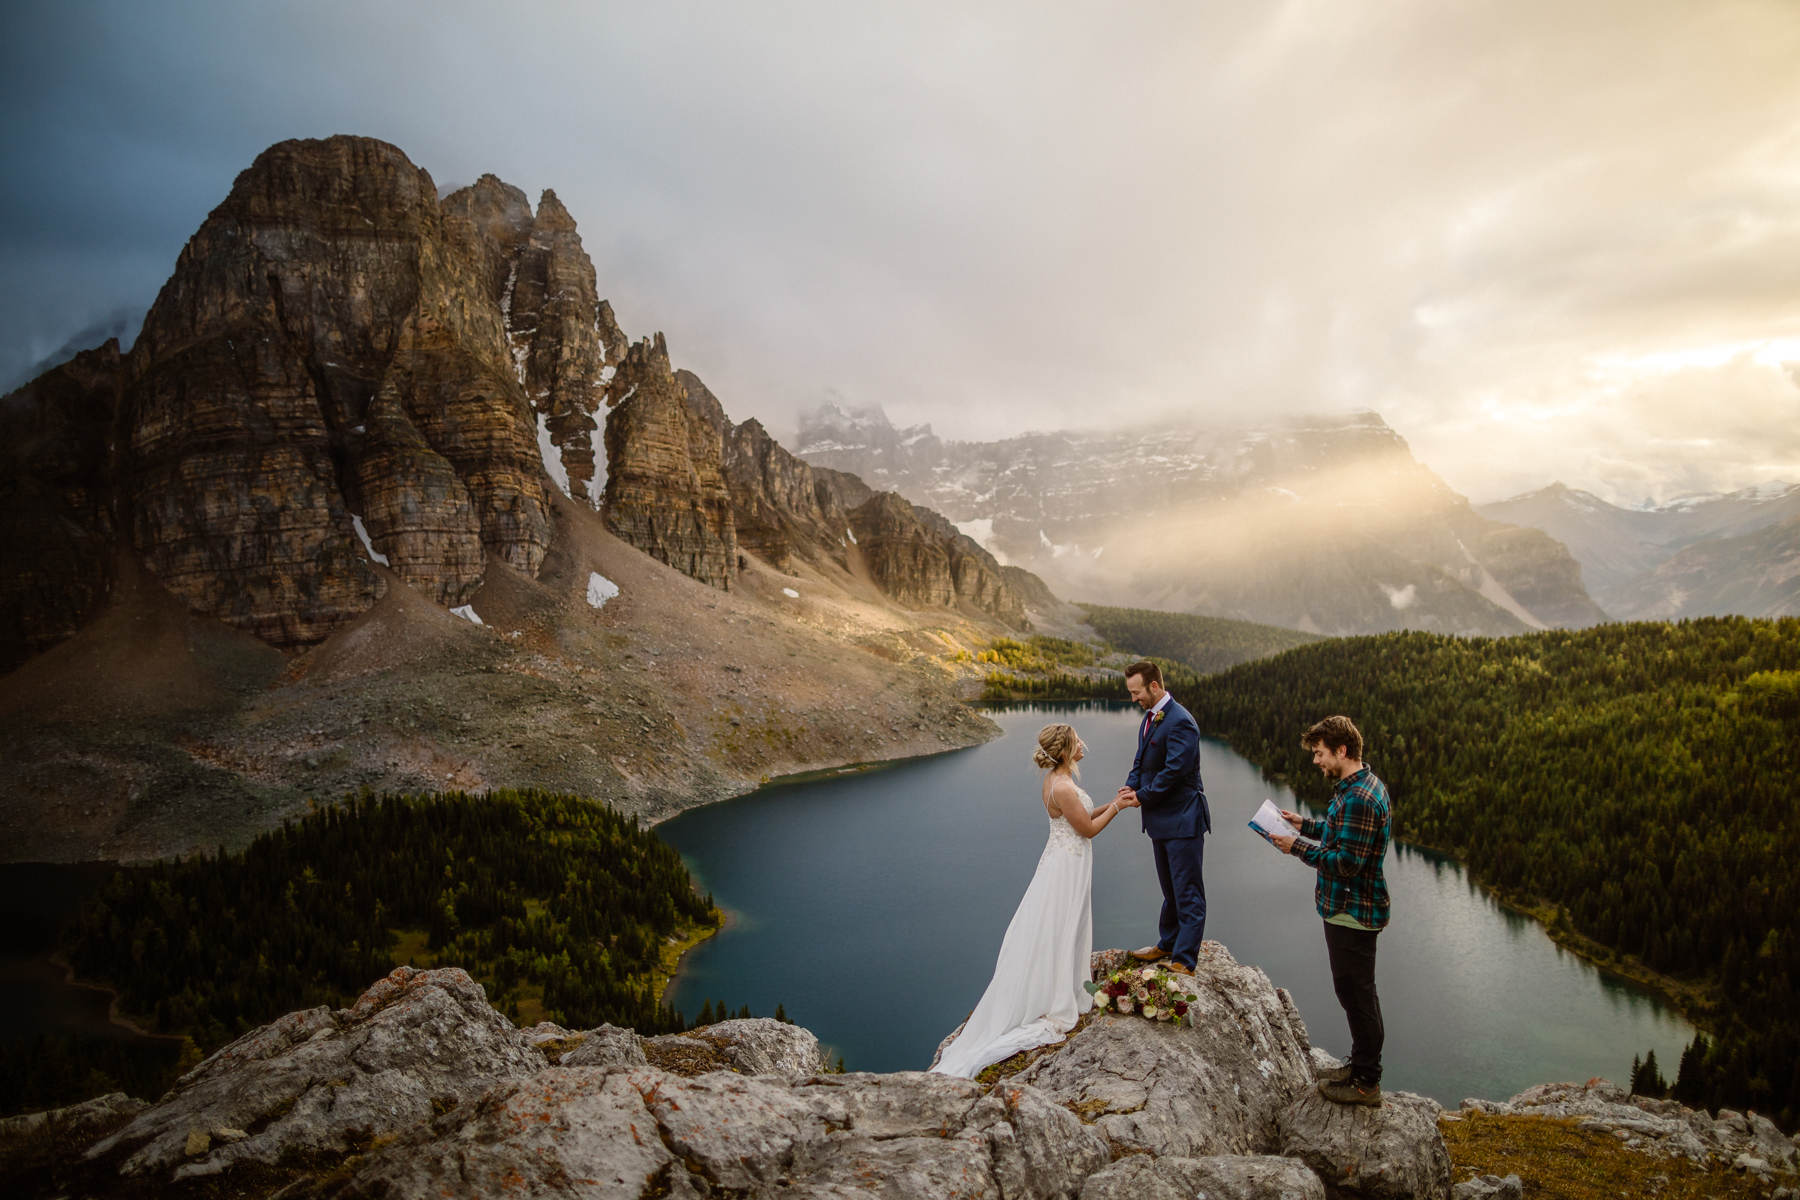 Mount Assiniboine Elopement Photographers at a Backcountry Lodge - Photo 33